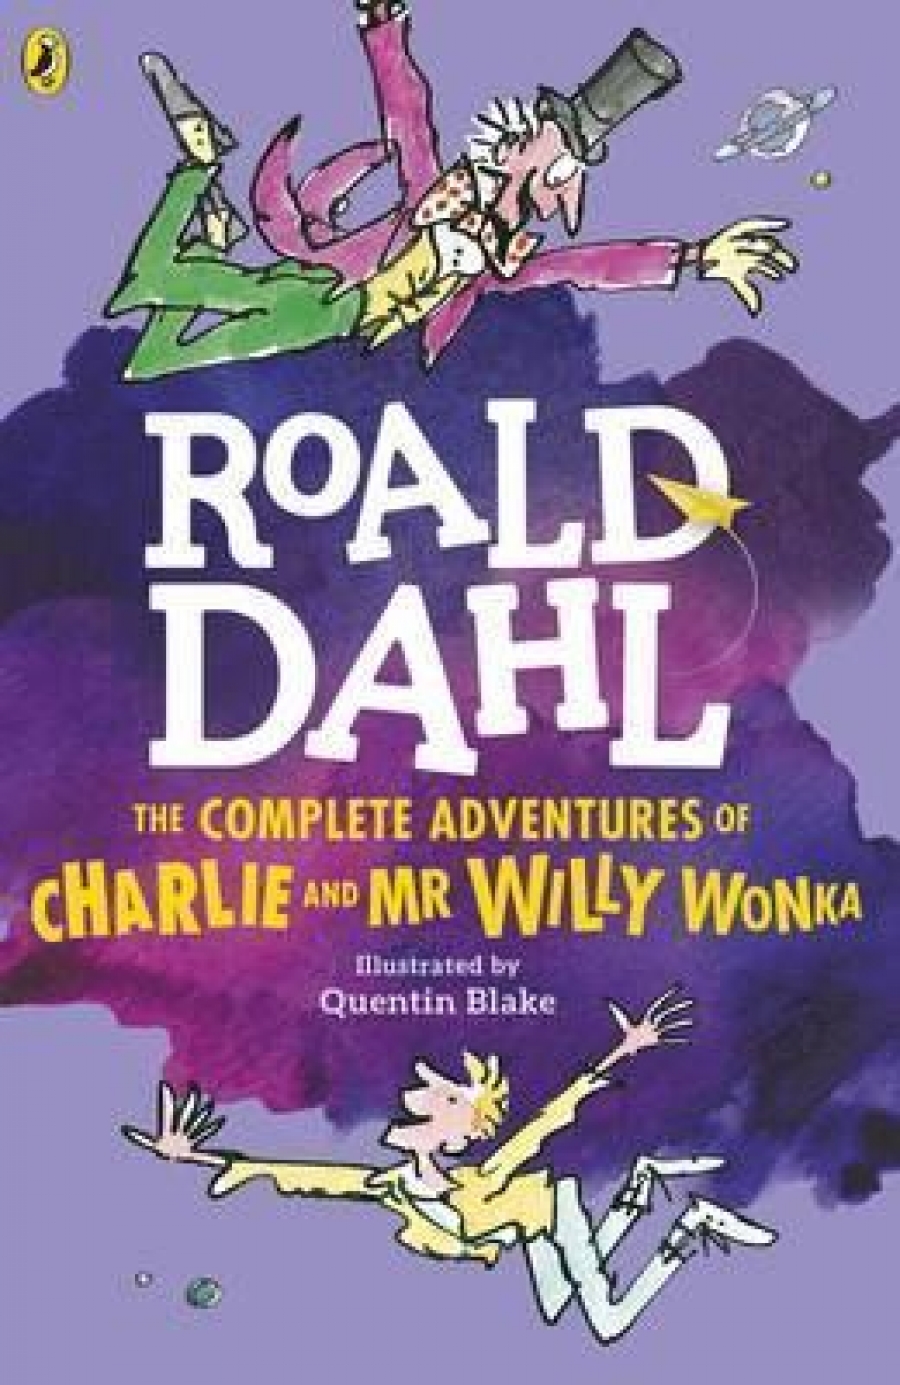 Roald Dahl The Complete Adventures of Charlie and Mr. Willy Wonka 